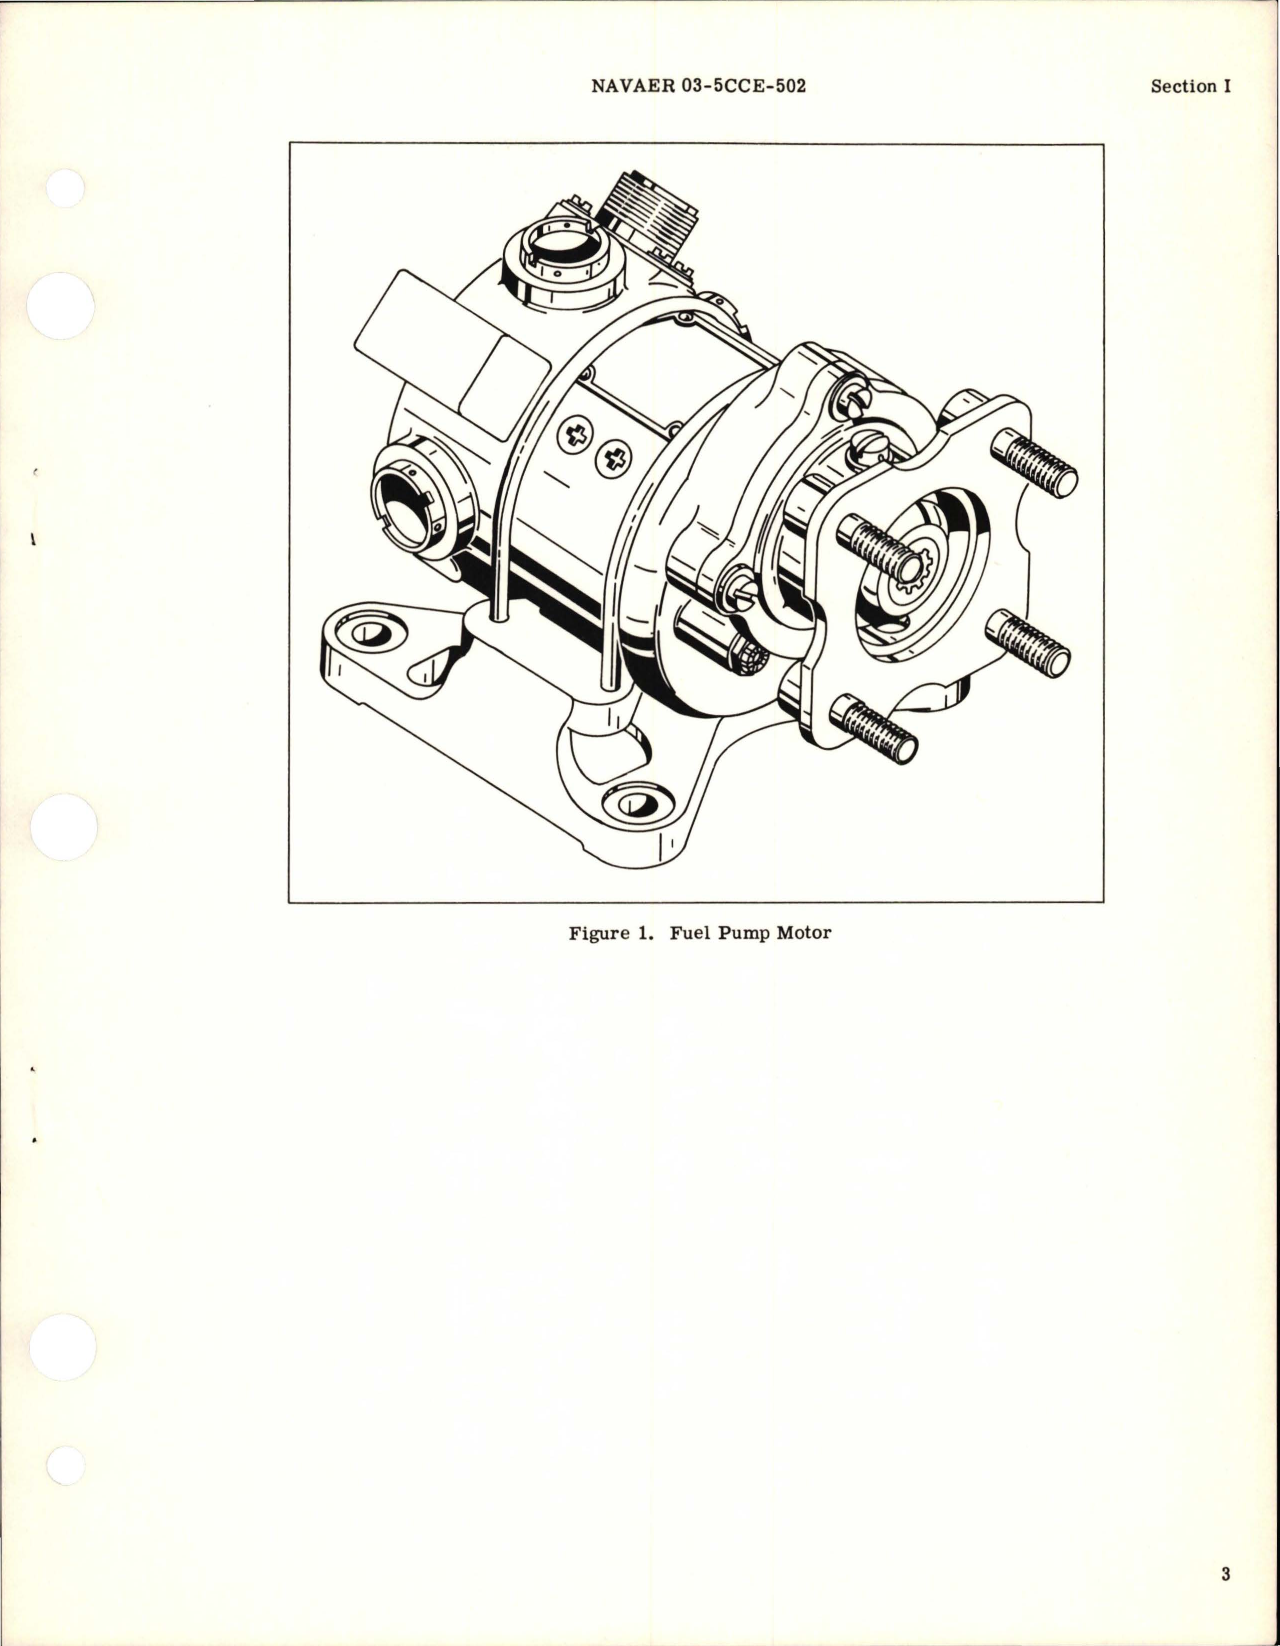 Sample page 5 from AirCorps Library document: Illustrated Parts Breakdown for Motor Assembly - A8574A1 